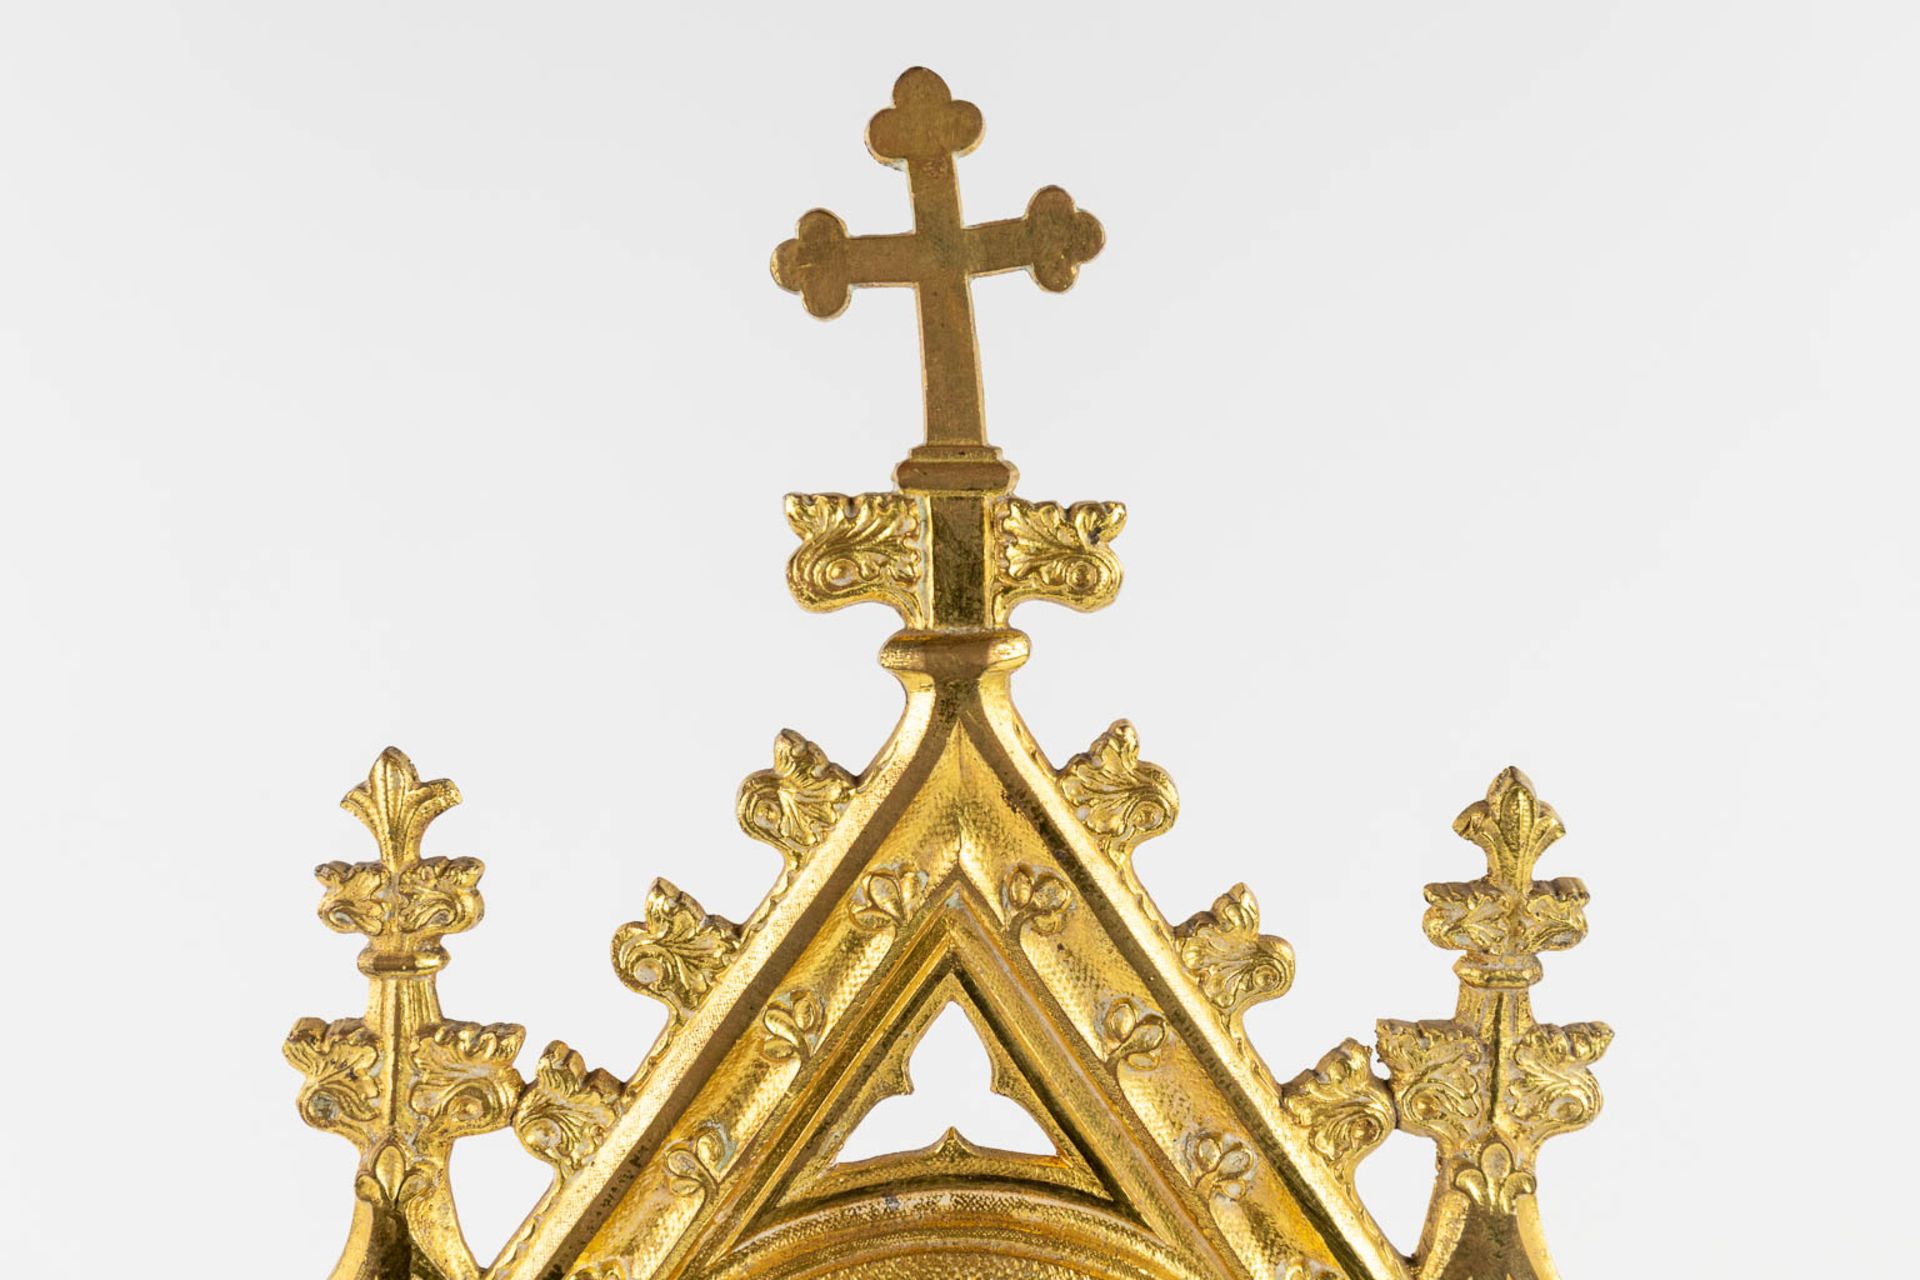 A sealed theca with relic 'De Spongia DNJC' in a bronze monstrance in a gothic revival style. 1858. - Image 8 of 17